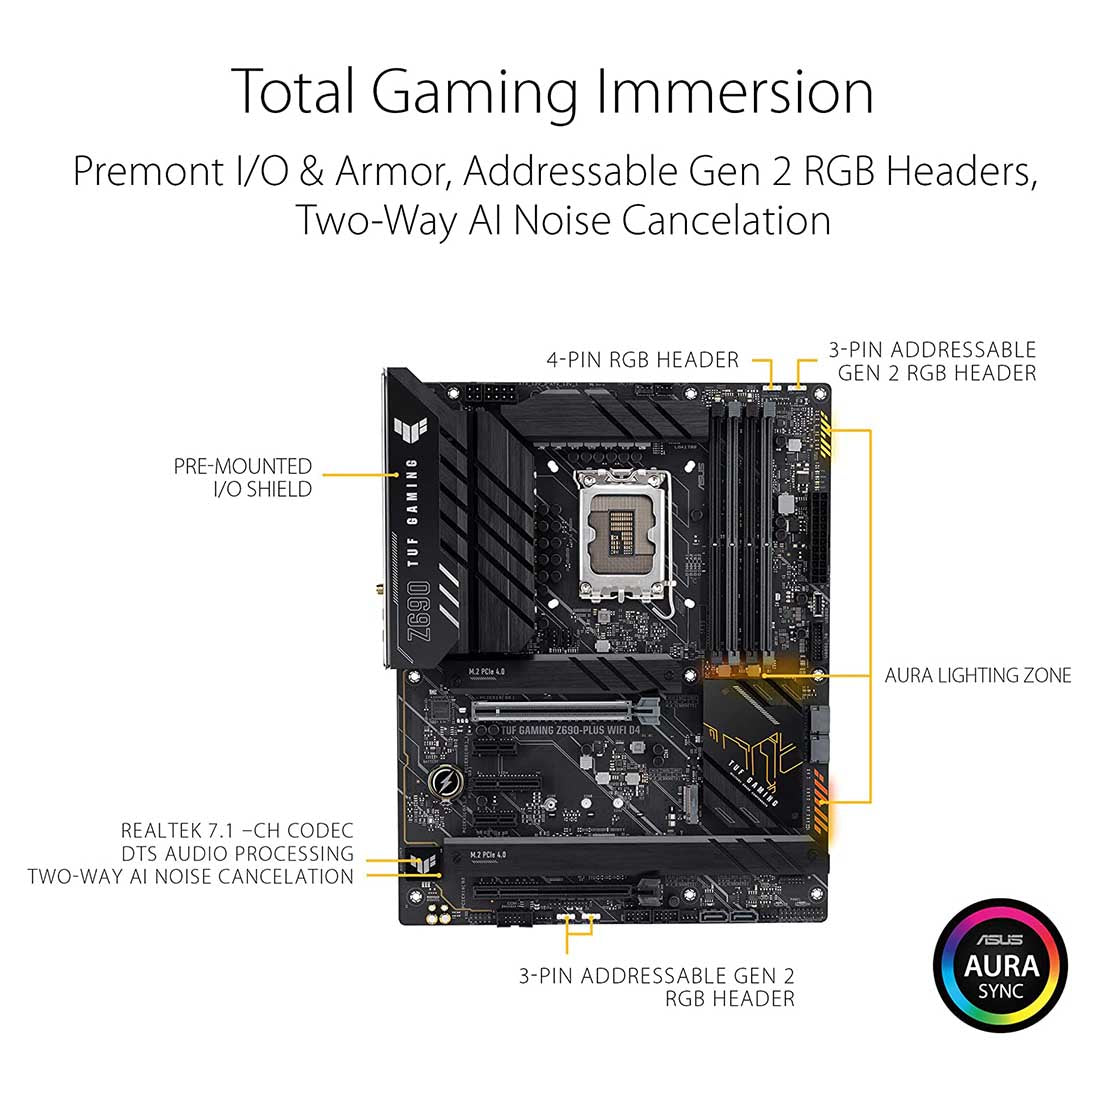 ASUS Z690 TUF GAMING Z690-Plus WIFI D4 Intel Z690 LGA 1700 ATX Motherboard with PCIe 5.0 Thunderbolt 4 Header and Four M.2 Slots